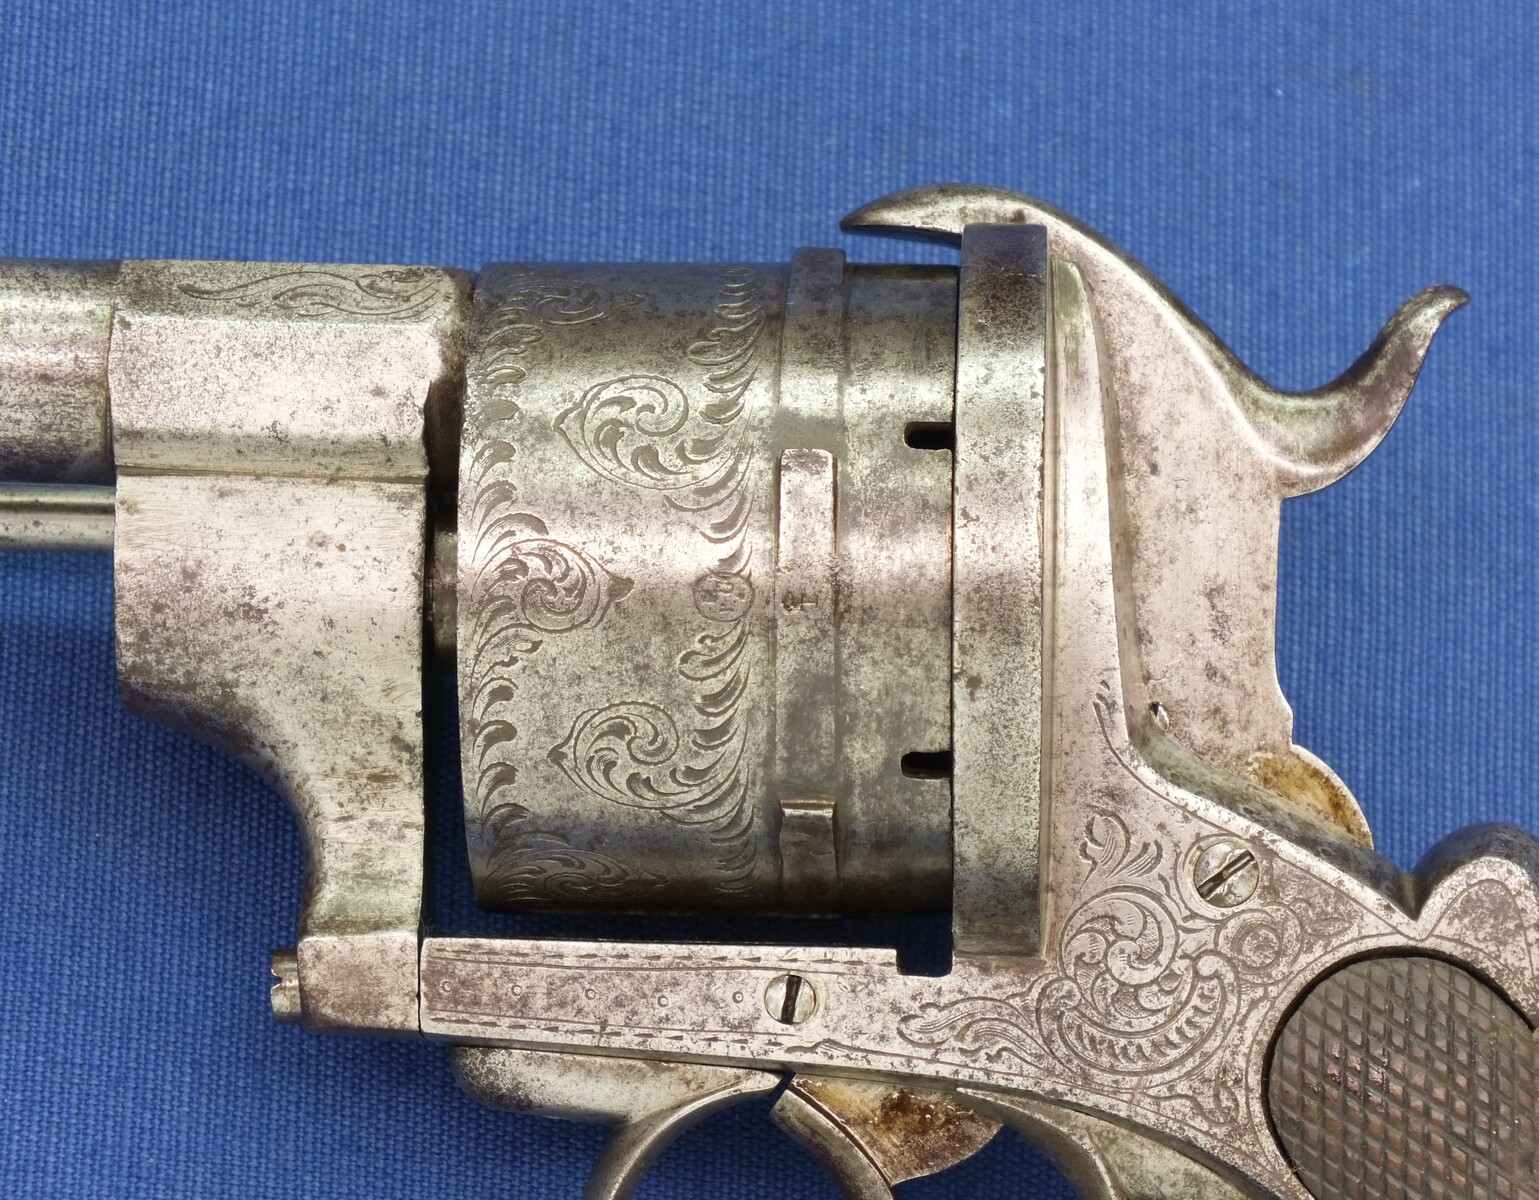 A very scarce antique 19th century Belgian 15 mm Lefaucheux Type 6 shot Pinfire Revolver, single and double action, length 32 cm, in good very condition. Price 1.650 euro